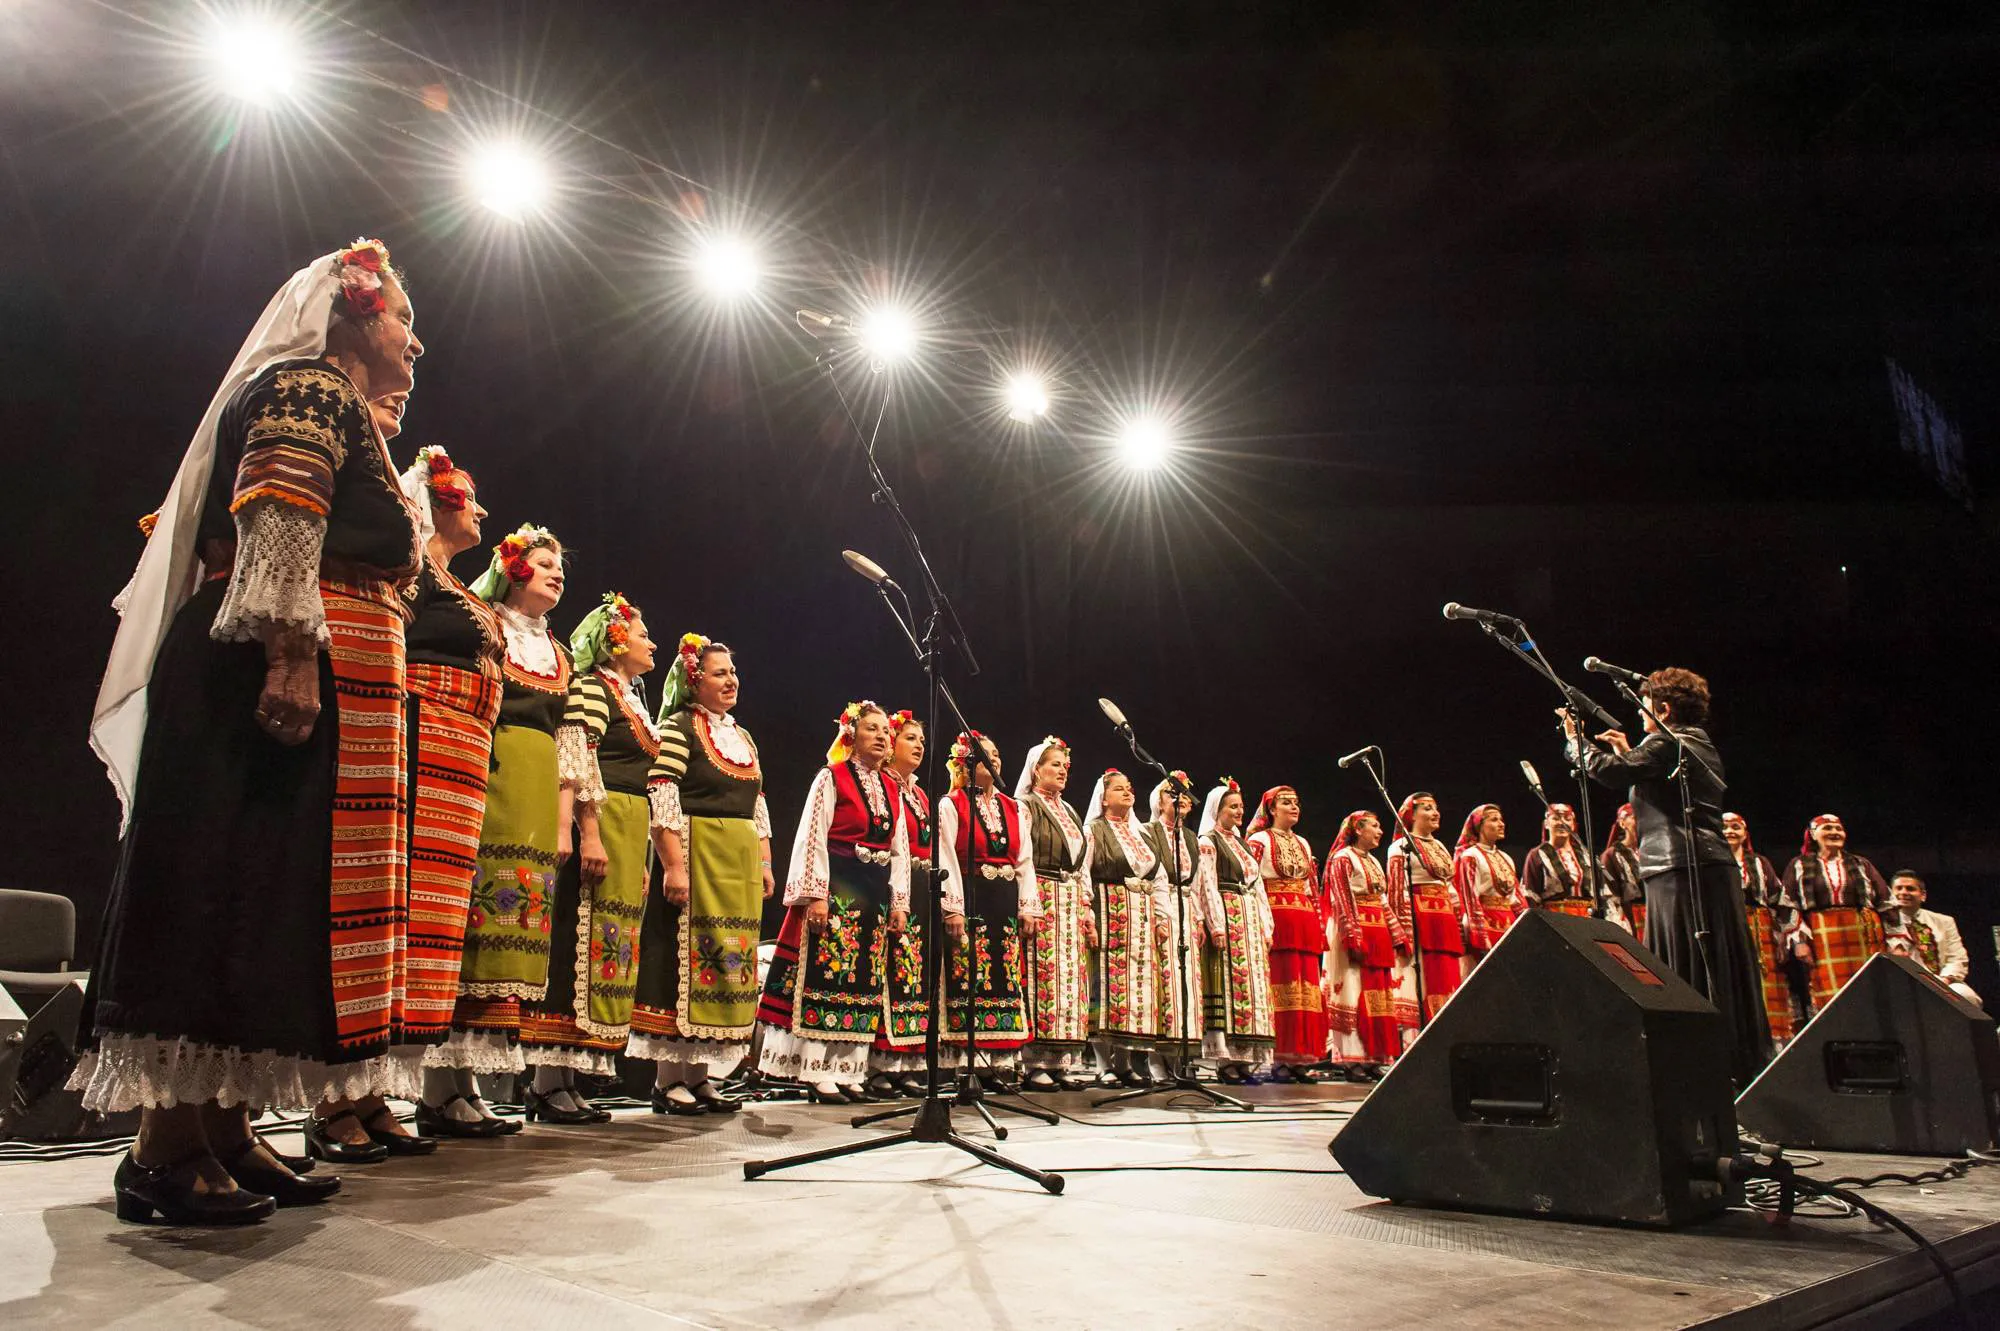 Bulgarian State Television Female Vocal Choir (CC) Daznaempoveche https://creativecommons.org/licenses/by-sa/3.0/